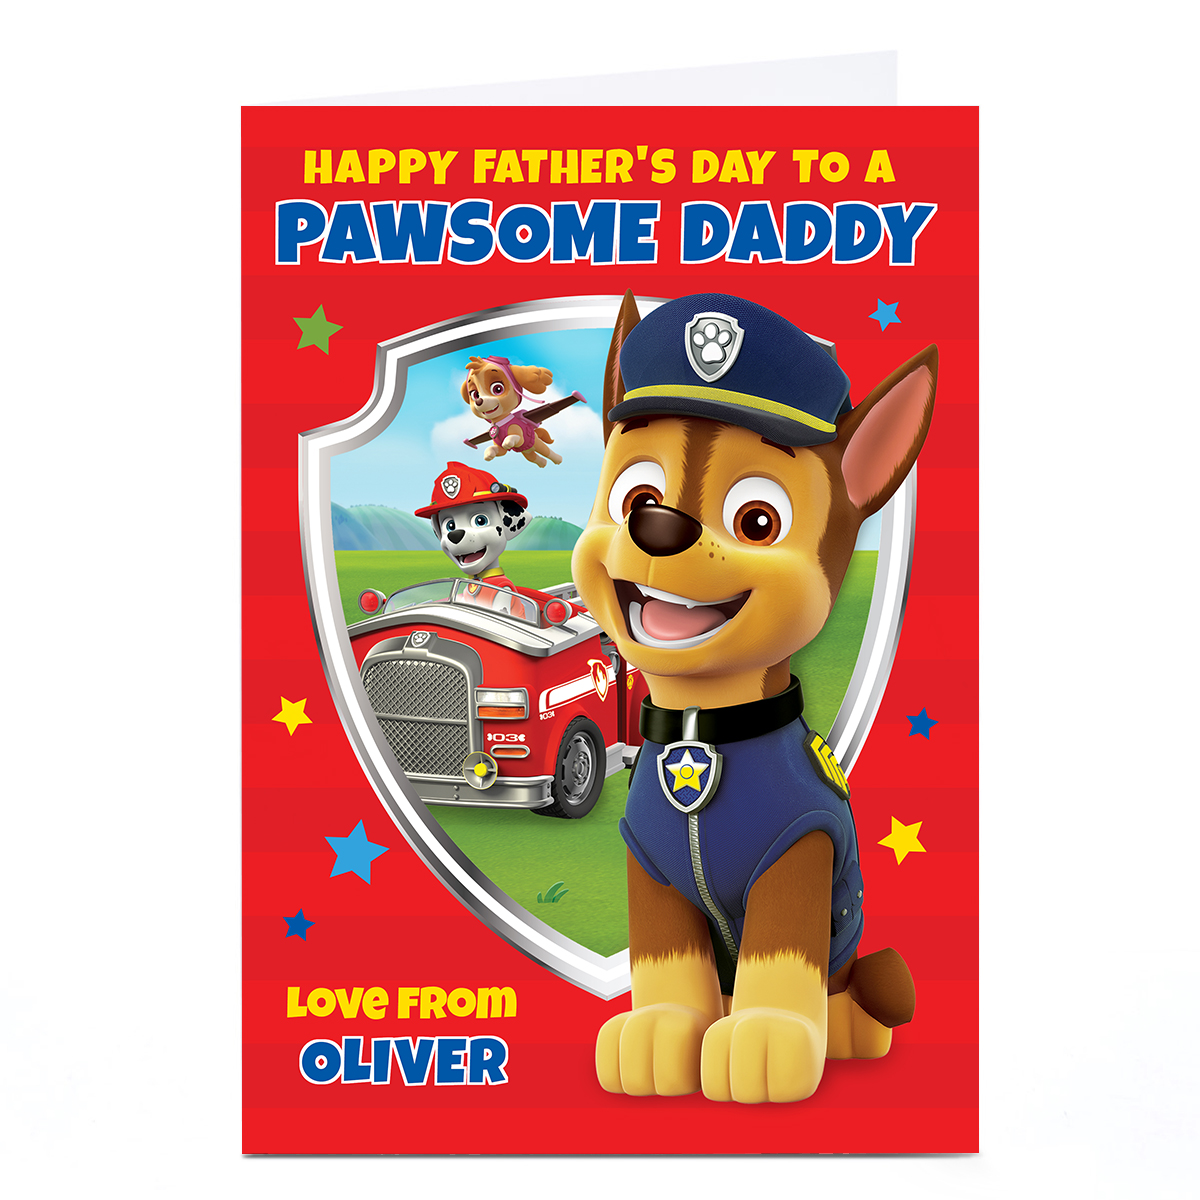 Personalised Paw Patrol Father's Day Card - Pawsome Daddy